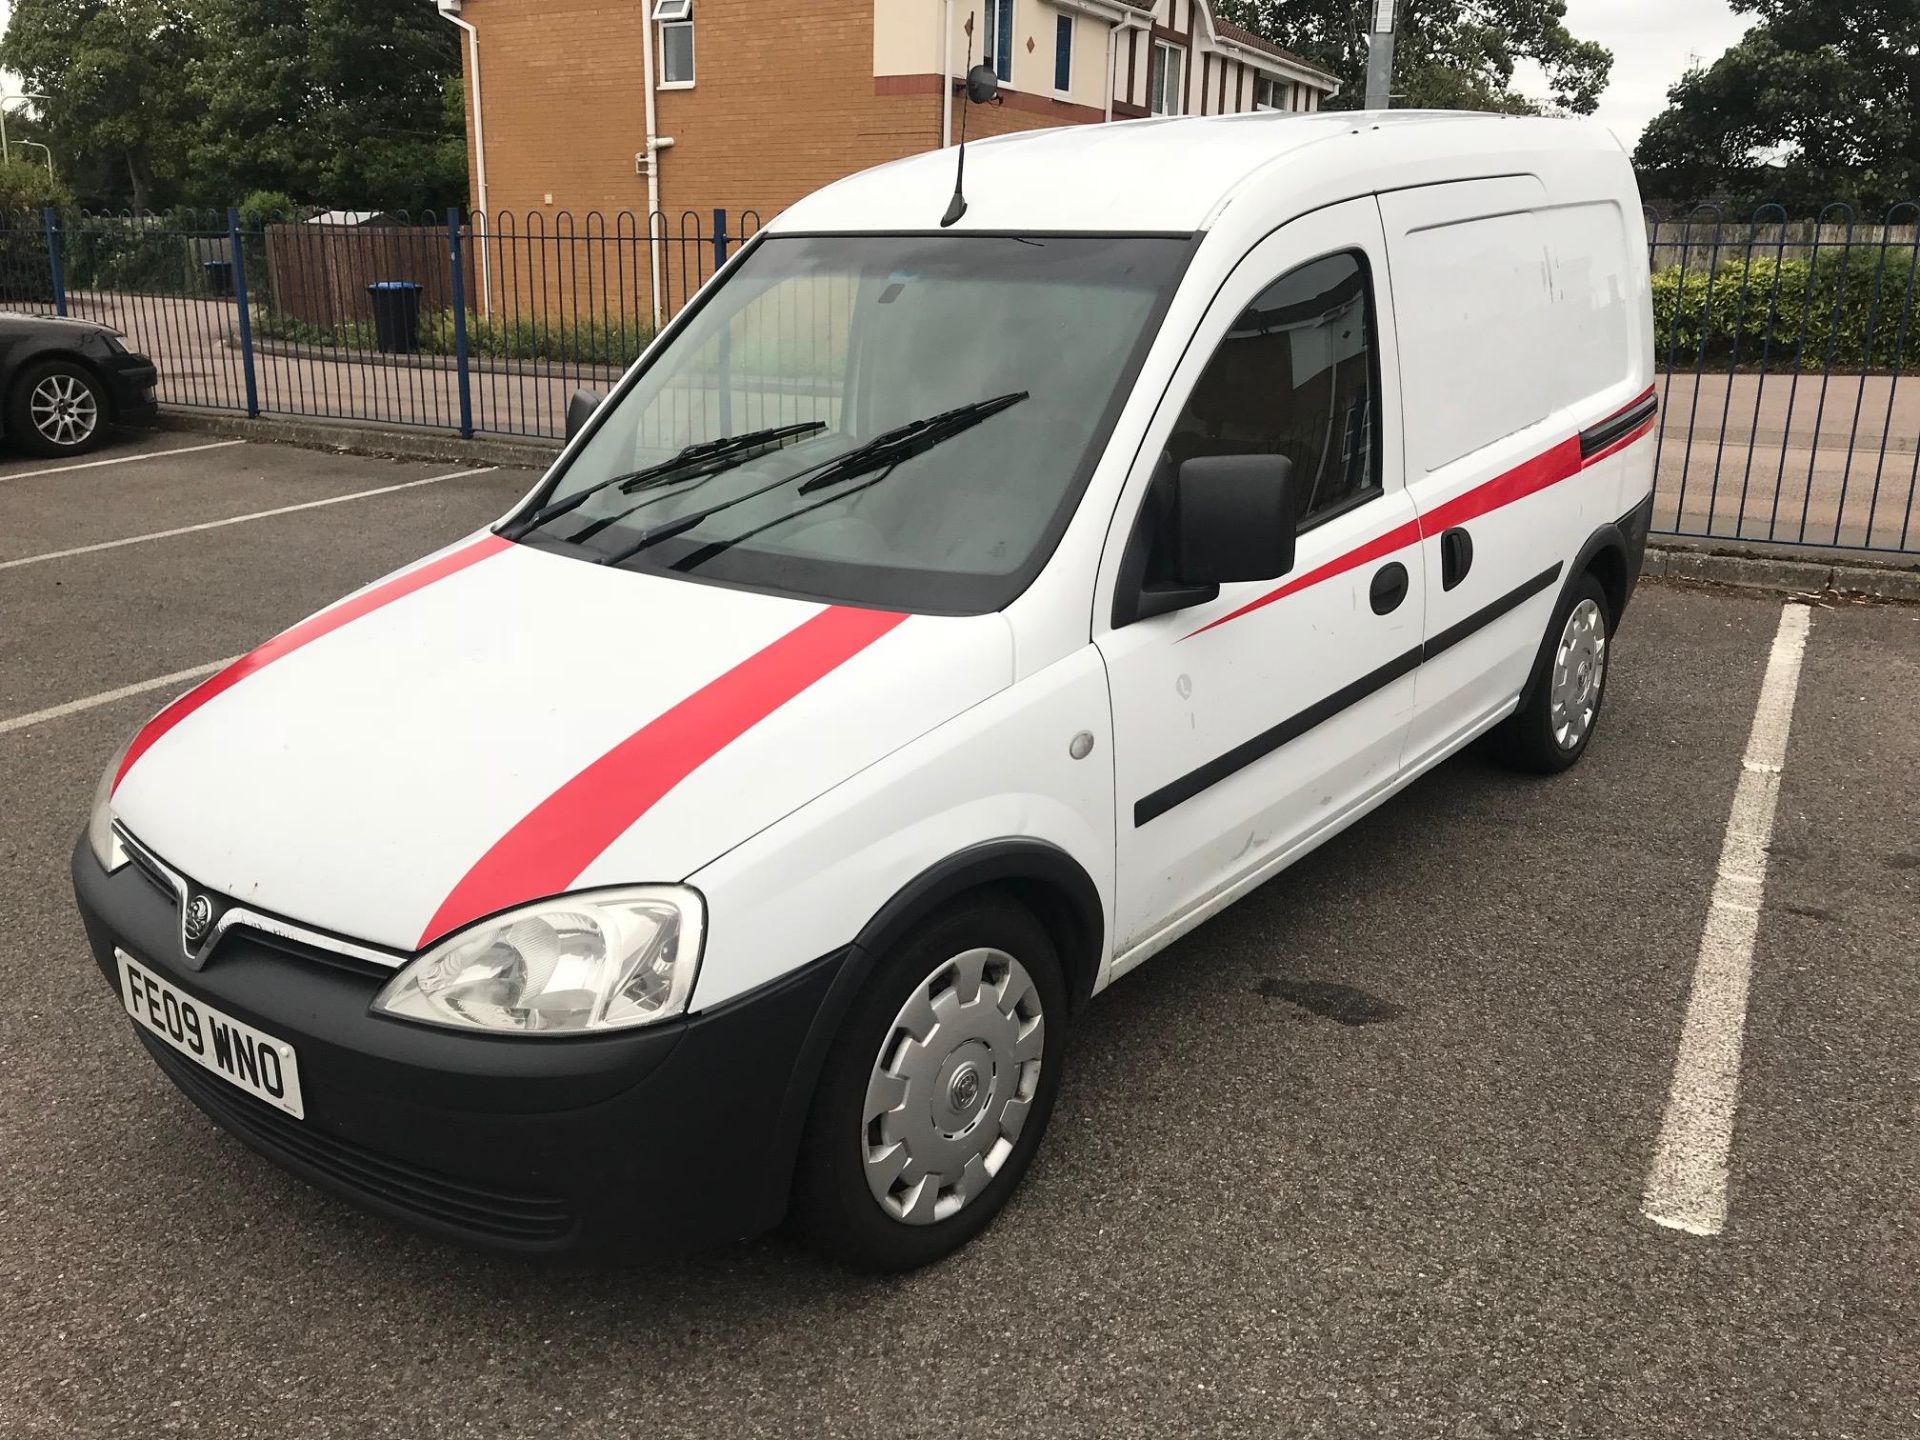 NO RESERVE! 2009/09 REG VAUXHALL COMBO 1700 CDTI 16V 1.7 DIESEL, SHOWING 2 FORMER KEEPERS *NO VAT* - Image 2 of 12